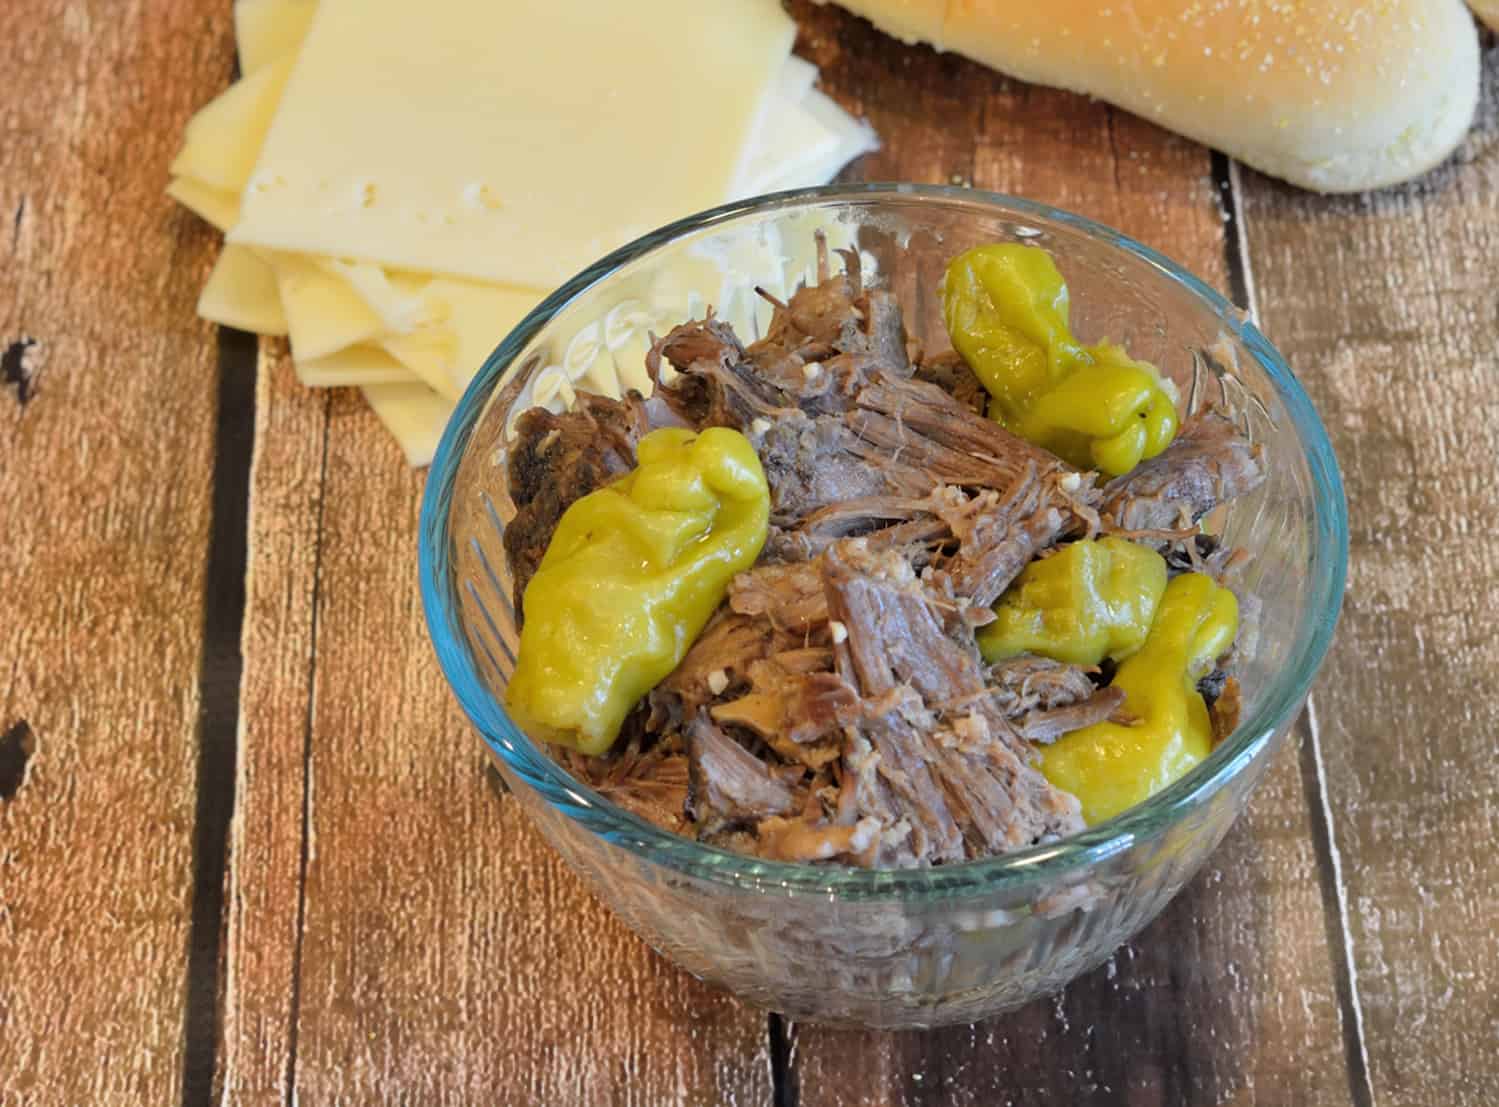 Slow Cooker Italian Beef Hoagies is pot roast cooked in pepperoncini chiles until fork tender, then smothered in cheese and serve on a hoagie roll. Great for parties too! #italianbeefhoagies #mississippipotroast www.savoryexperiments.com